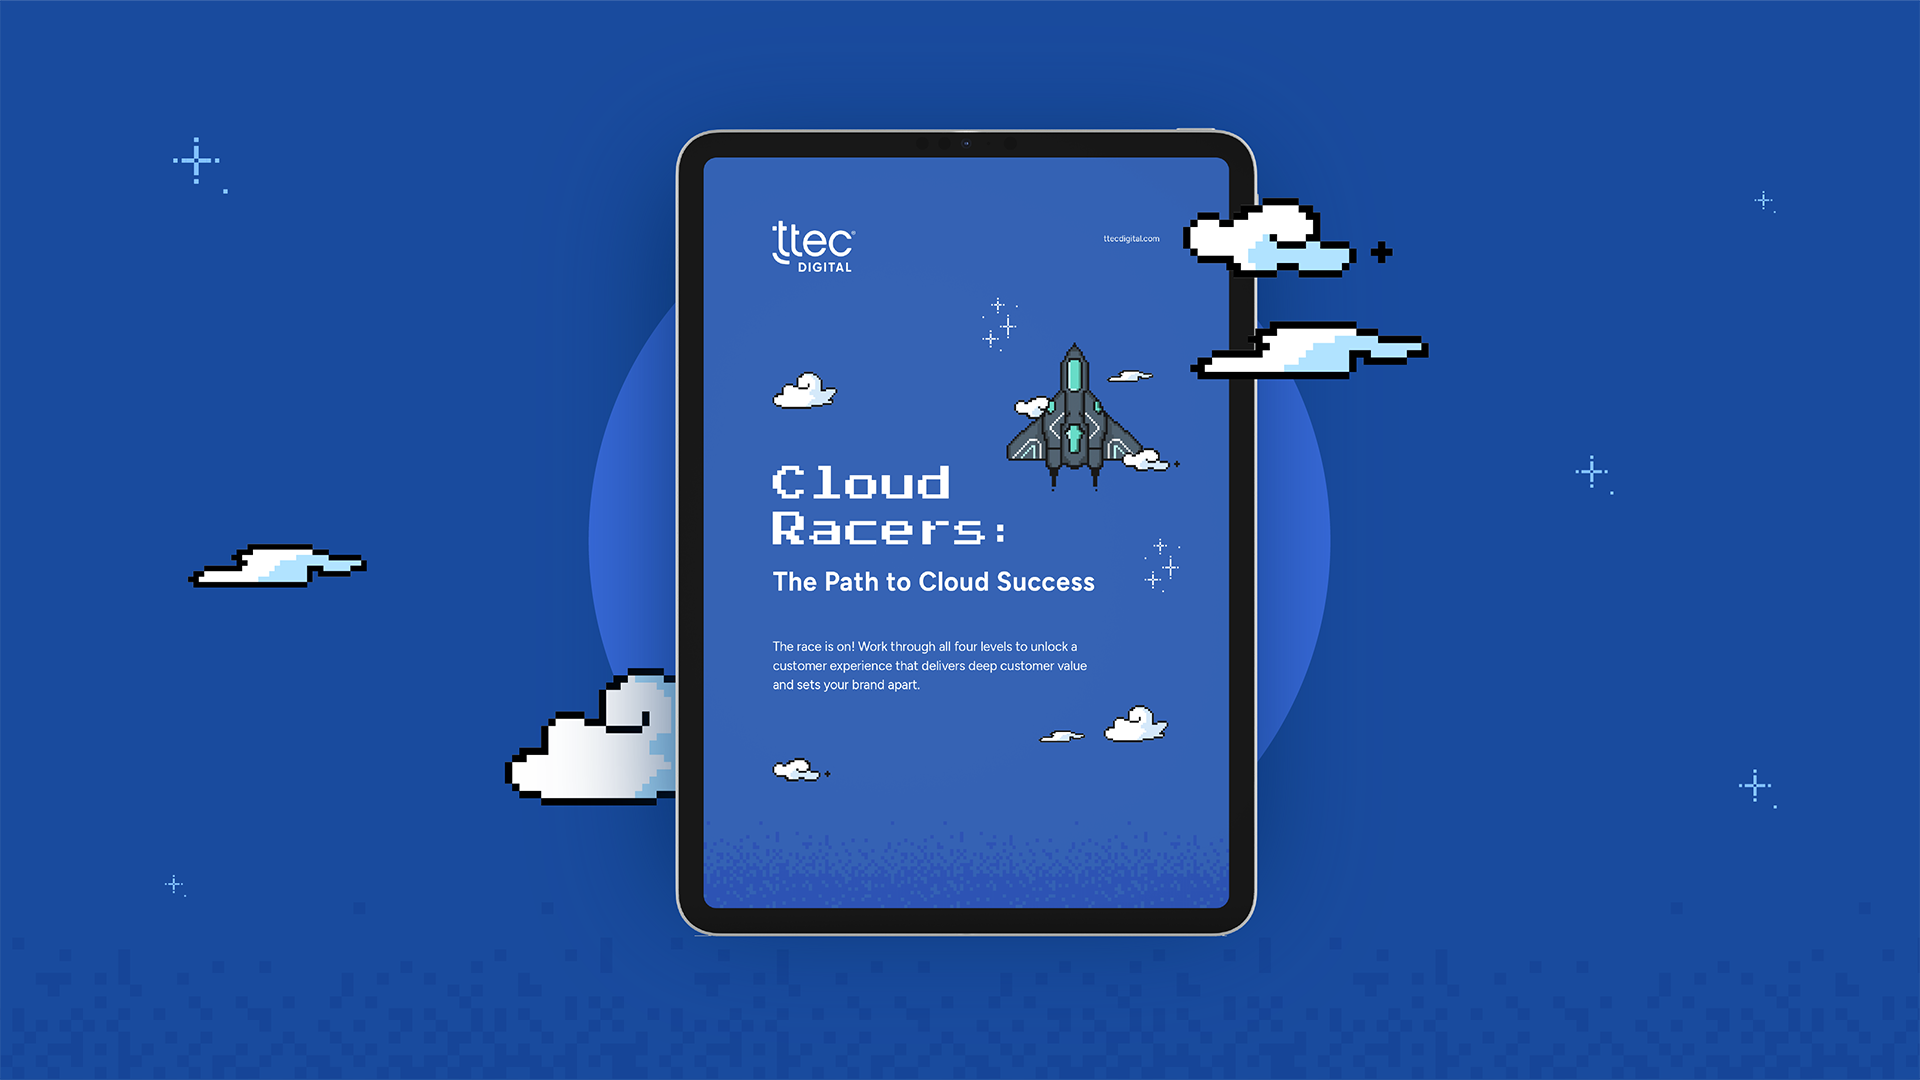 Cloud racers: The path to contact center success